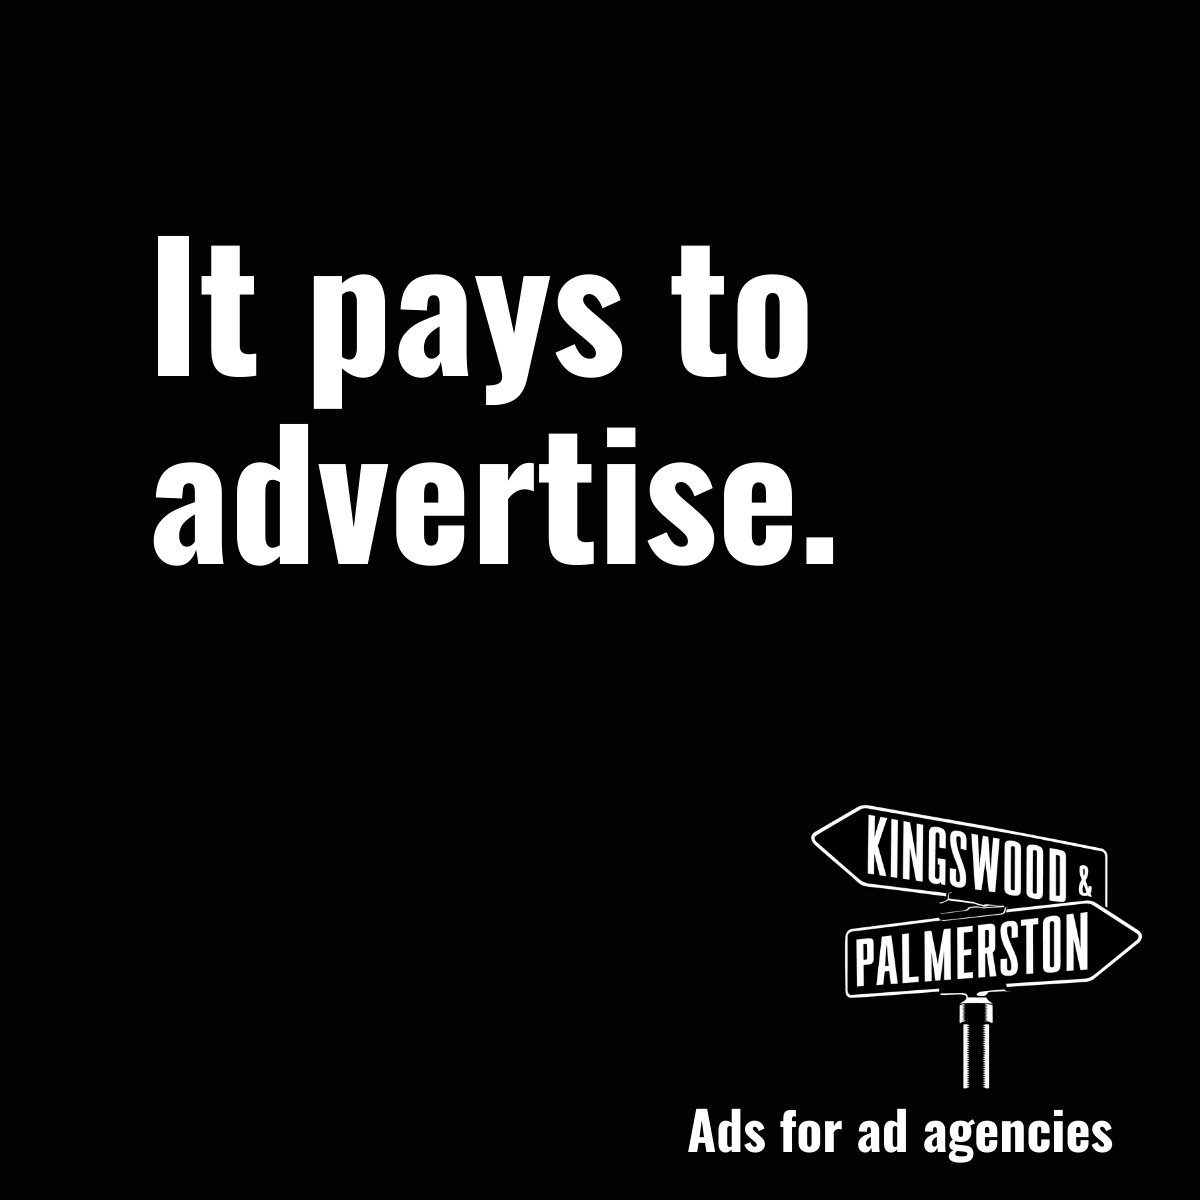 Tell me again why ad agencies don't advertise. #advertising #adsforadagencies